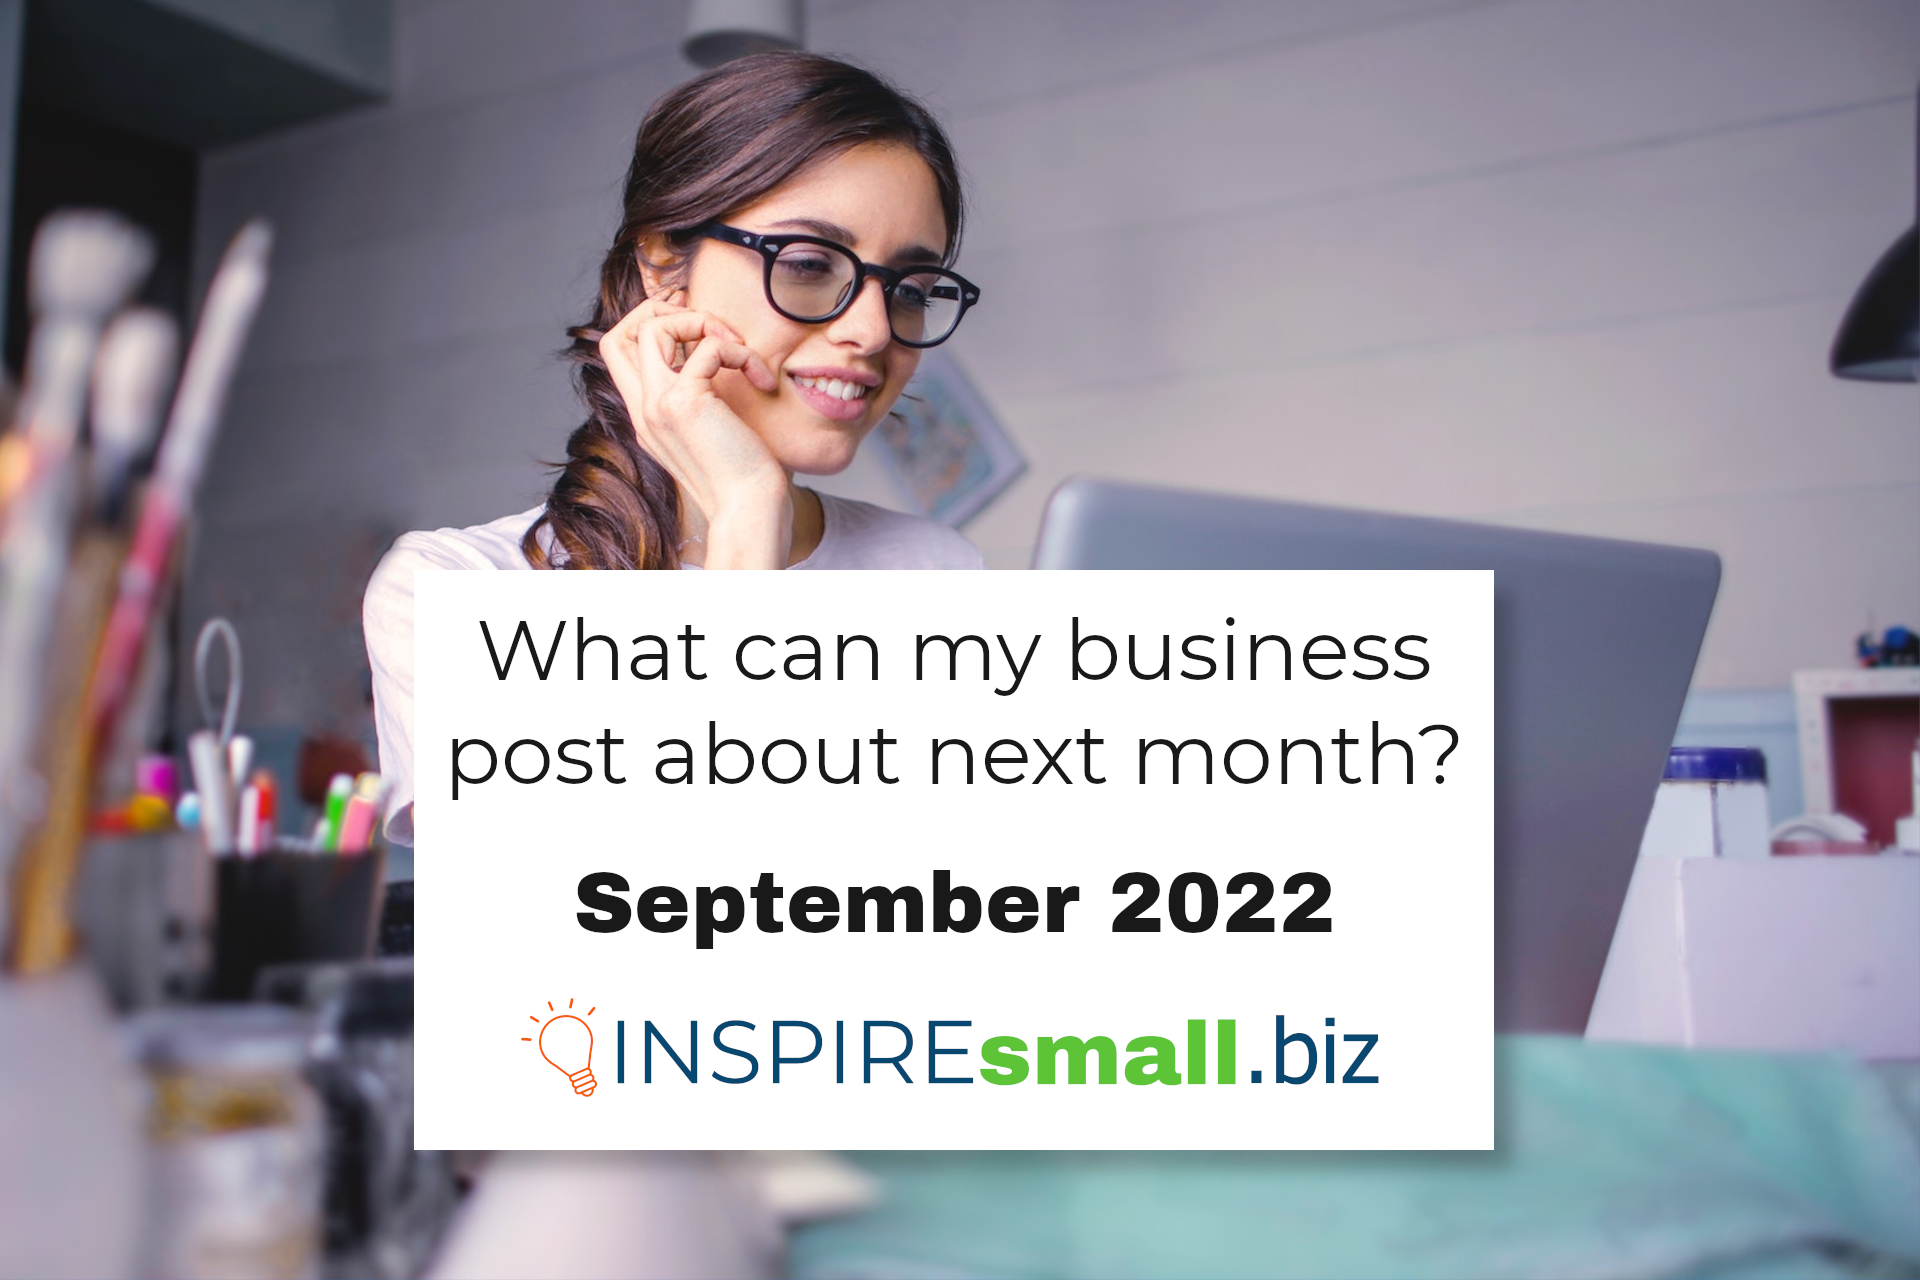 What can my business post about next month? September 2022